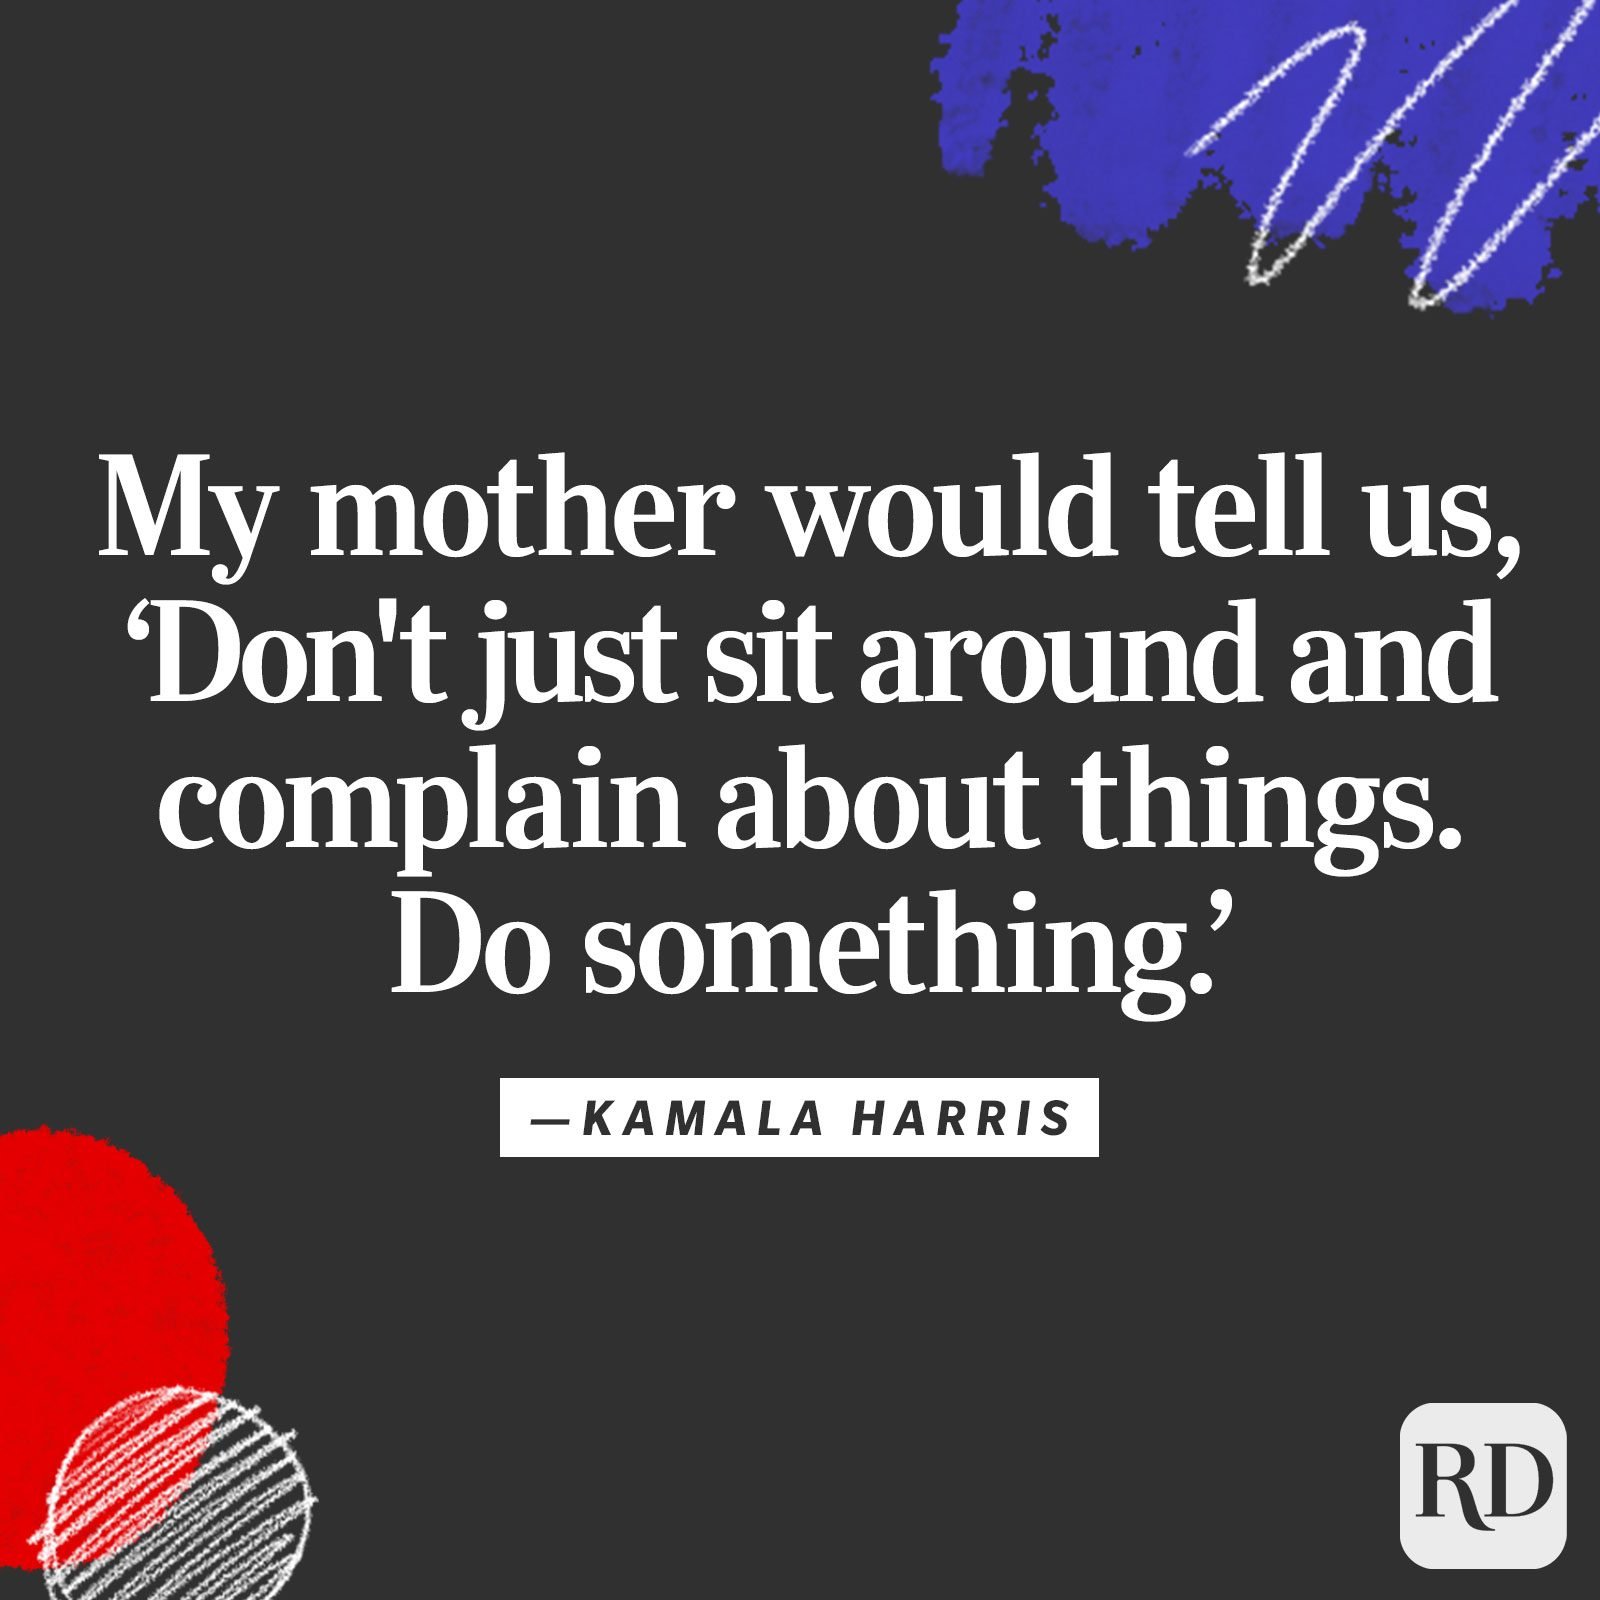 "My mother would tell us, 'Don't just sit around and complain about things. Do something.'"